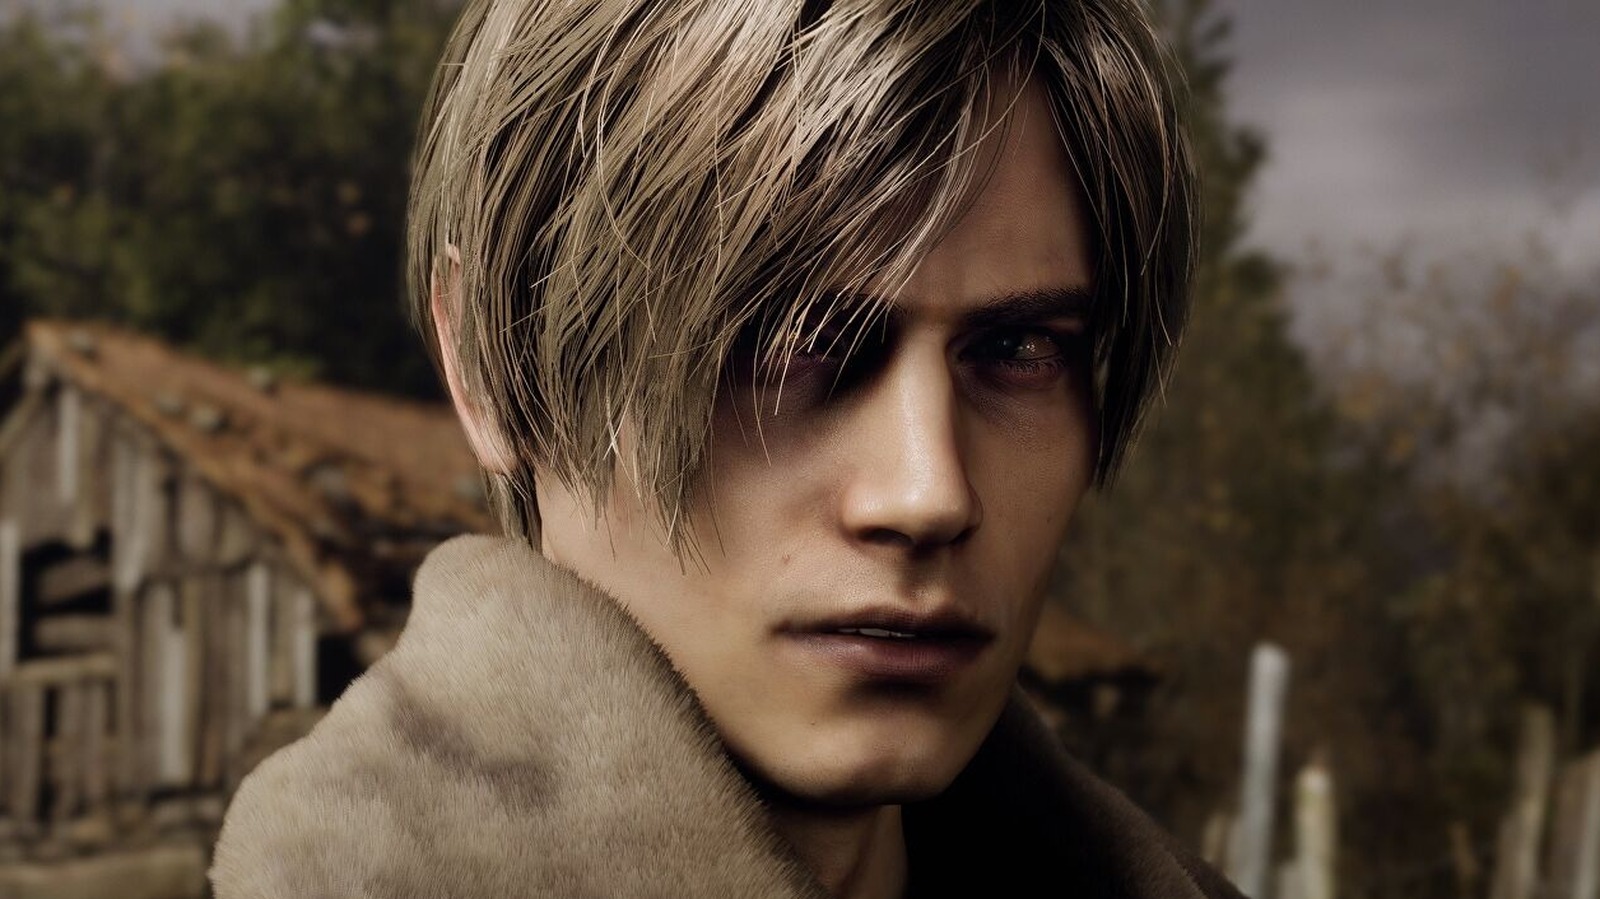 Meet The Four Gorgeous Performers Behind Resident Evil 4's Ashley